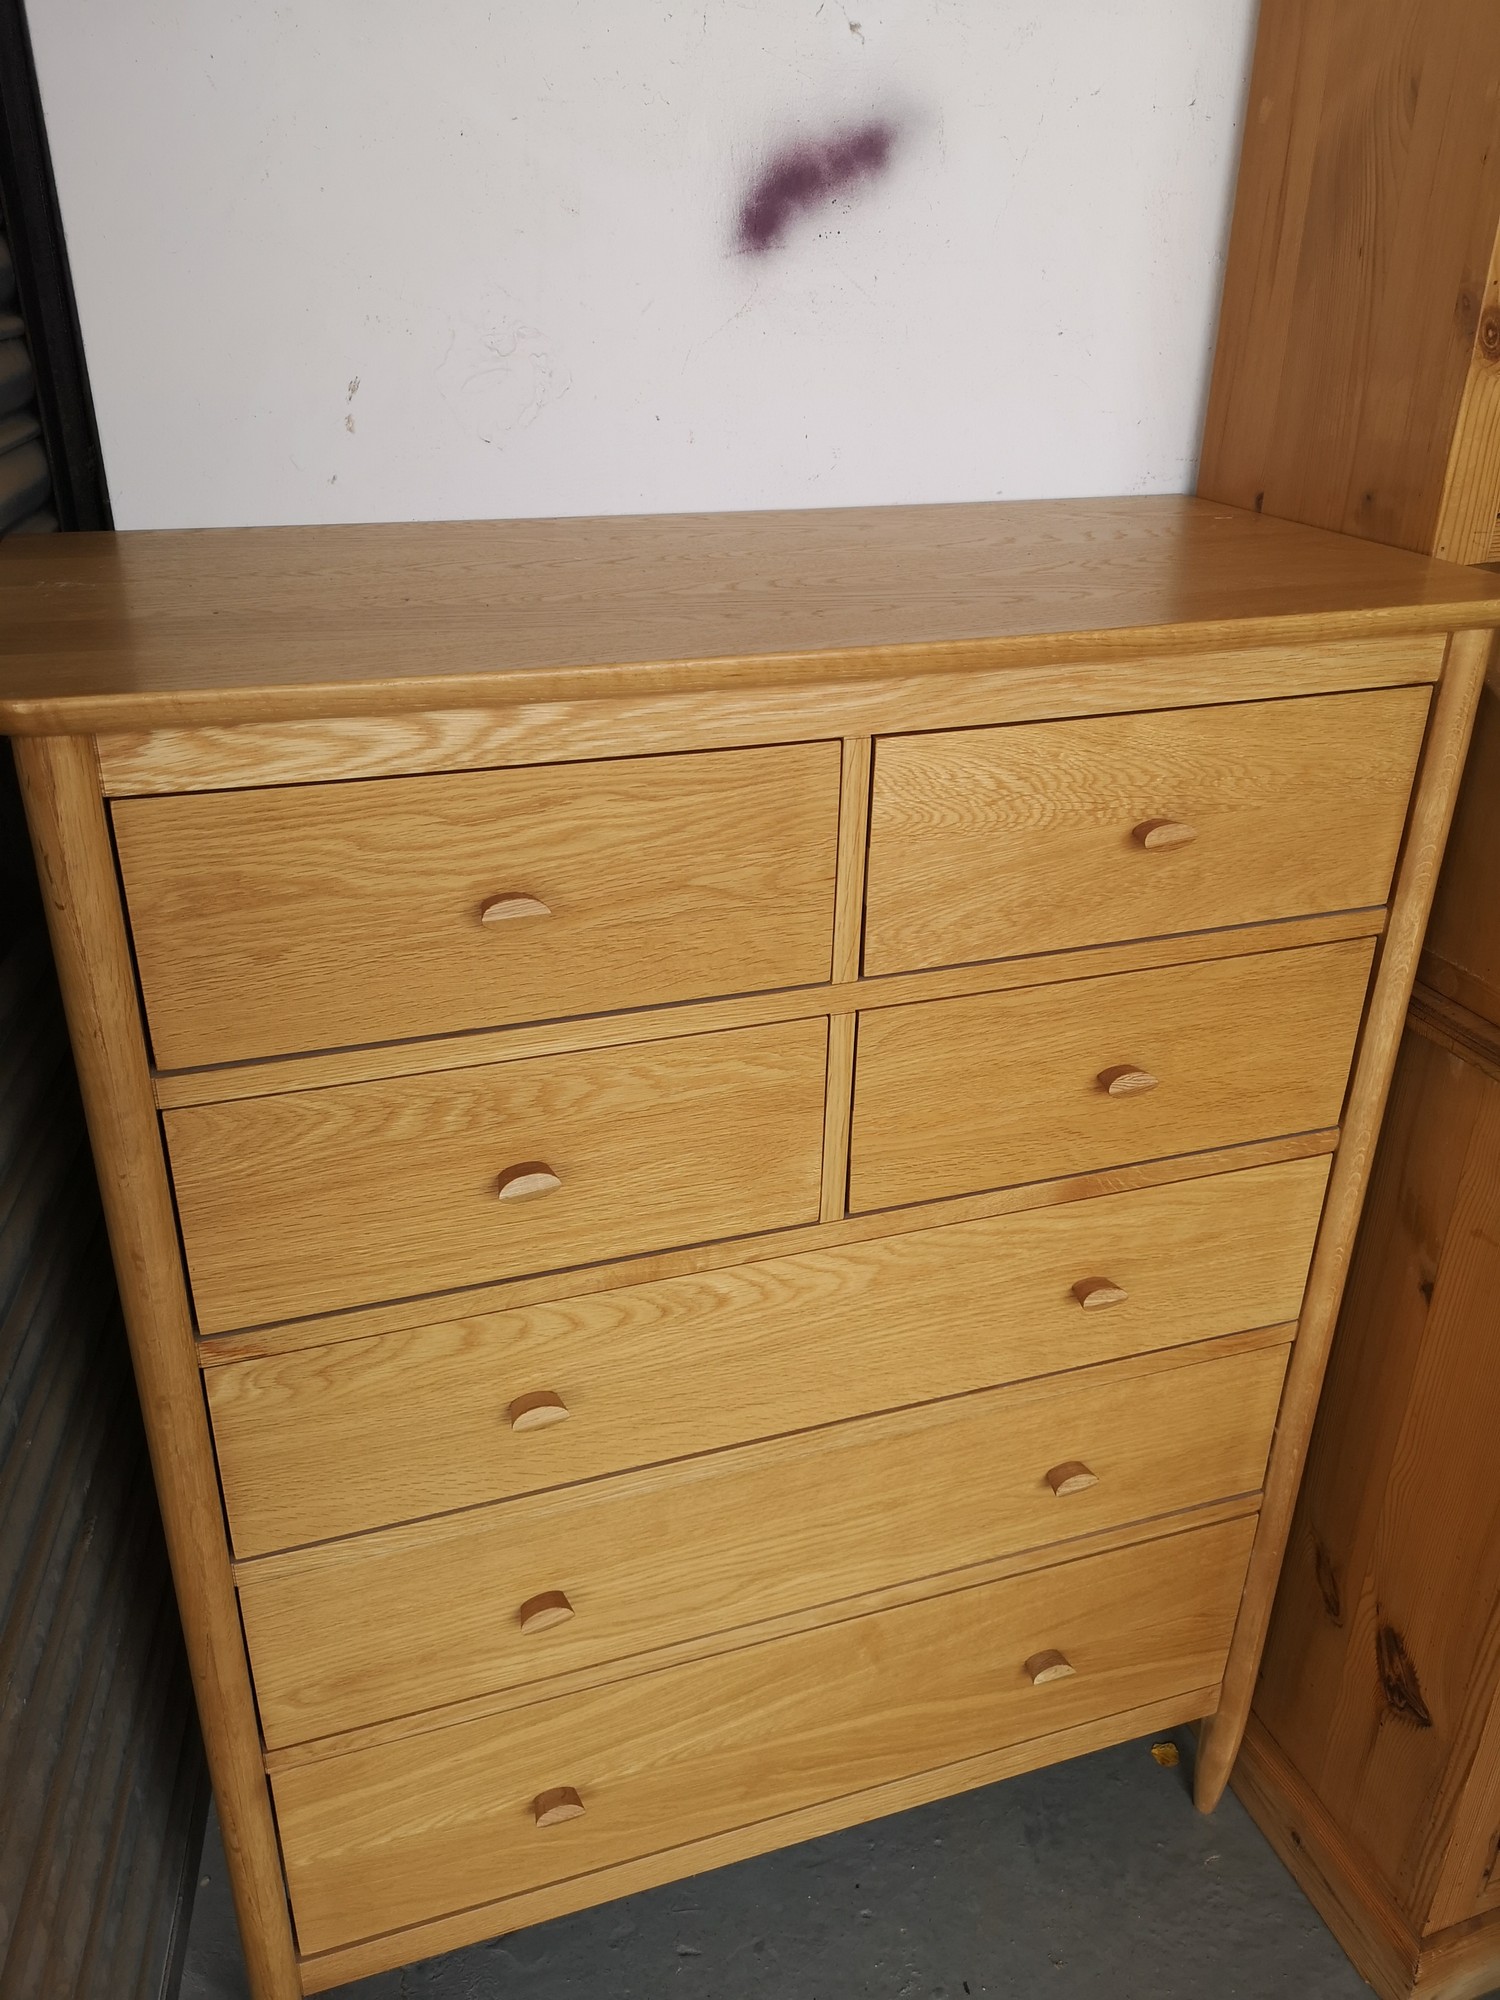 2 O 2 O 3 Large chest of drawers.